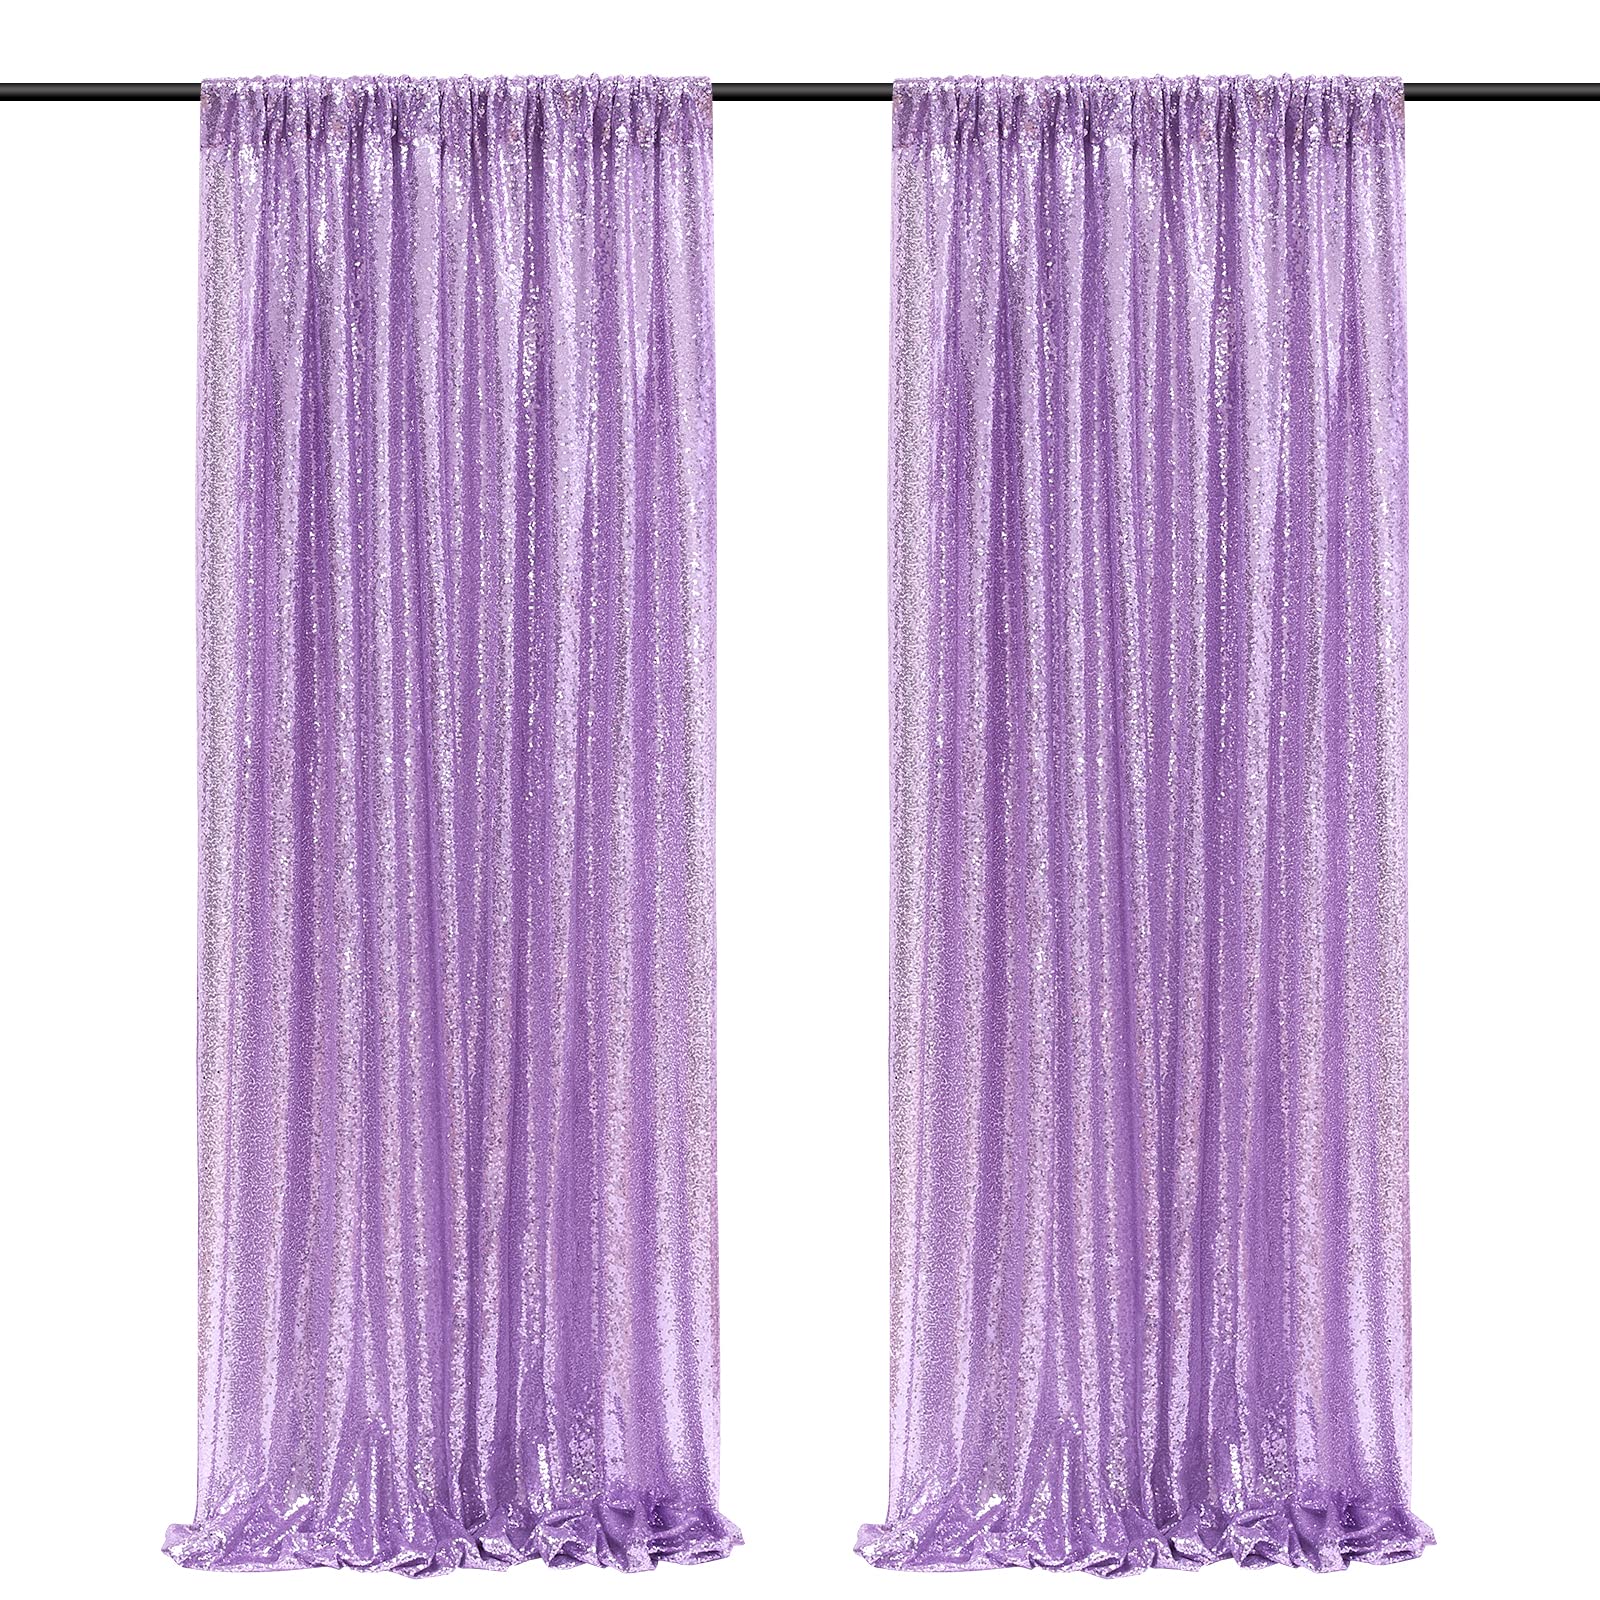 SoarDream Wedding Sequin Backdrop Lavender 2 Pieces 2ftx8ft Glitter Curtain Backdrop Arch Fabric Drapes for Baby Shower Birthday Party Decoration